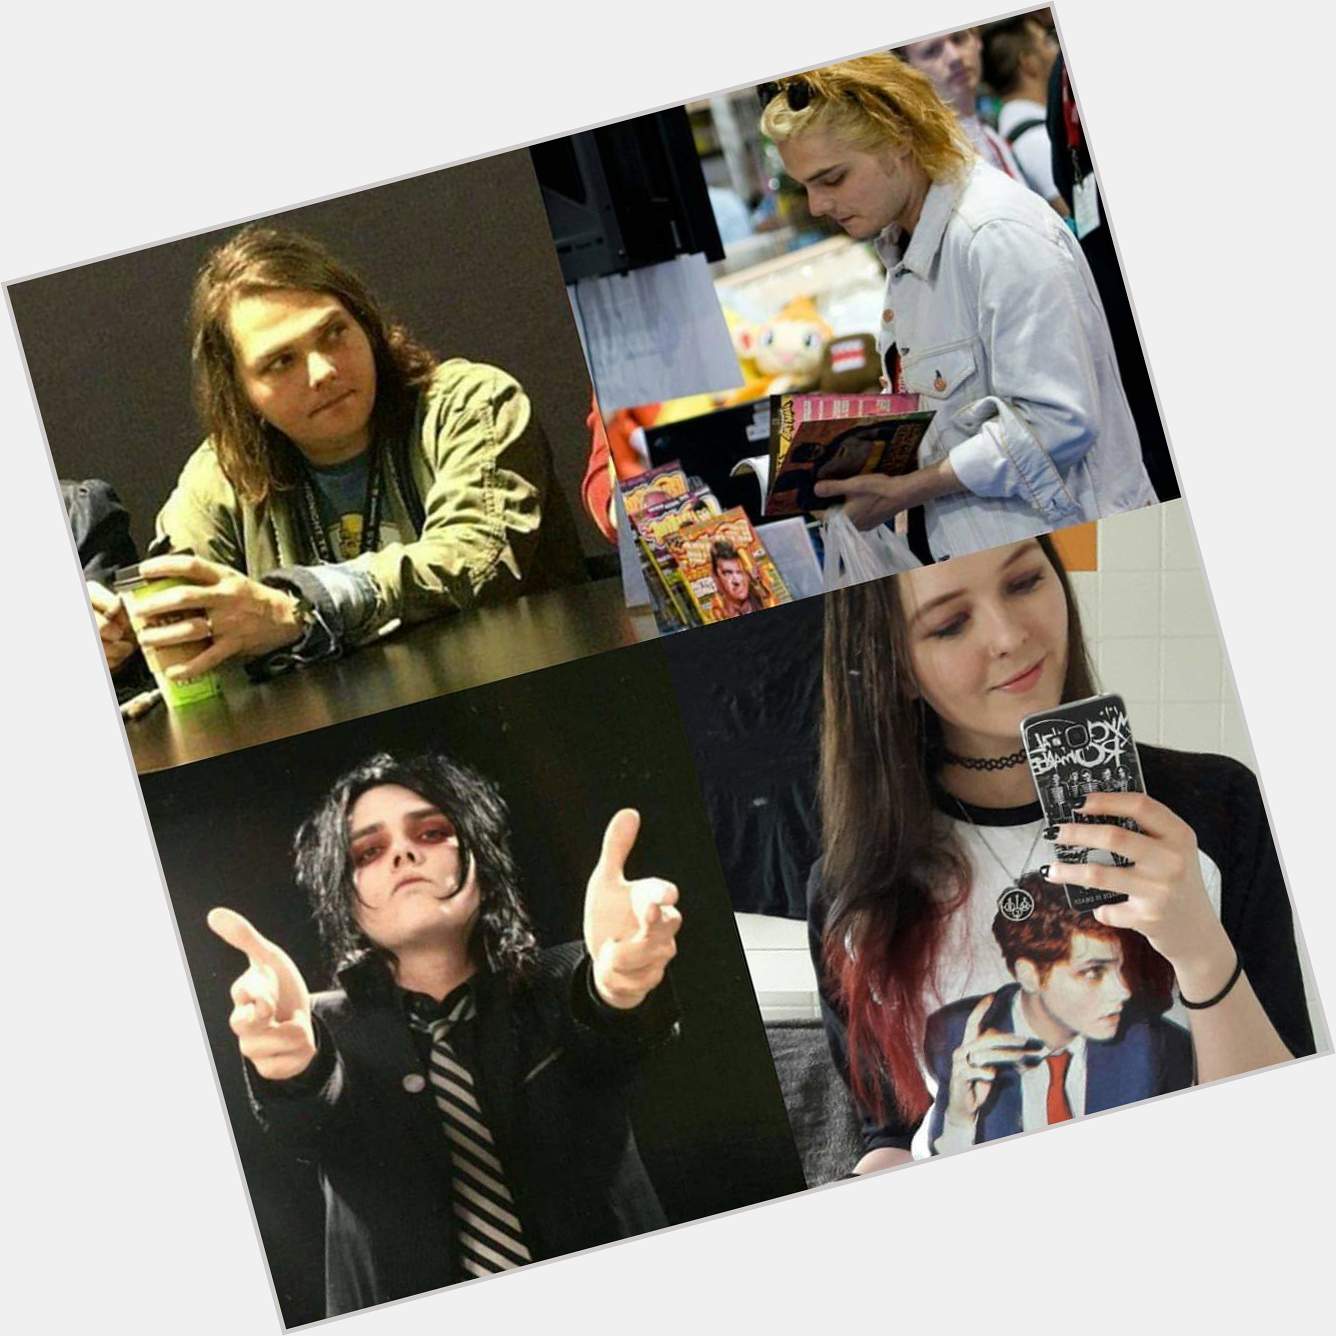 Happy birthday, Gerard Way. Love you & miss you irl & on message  